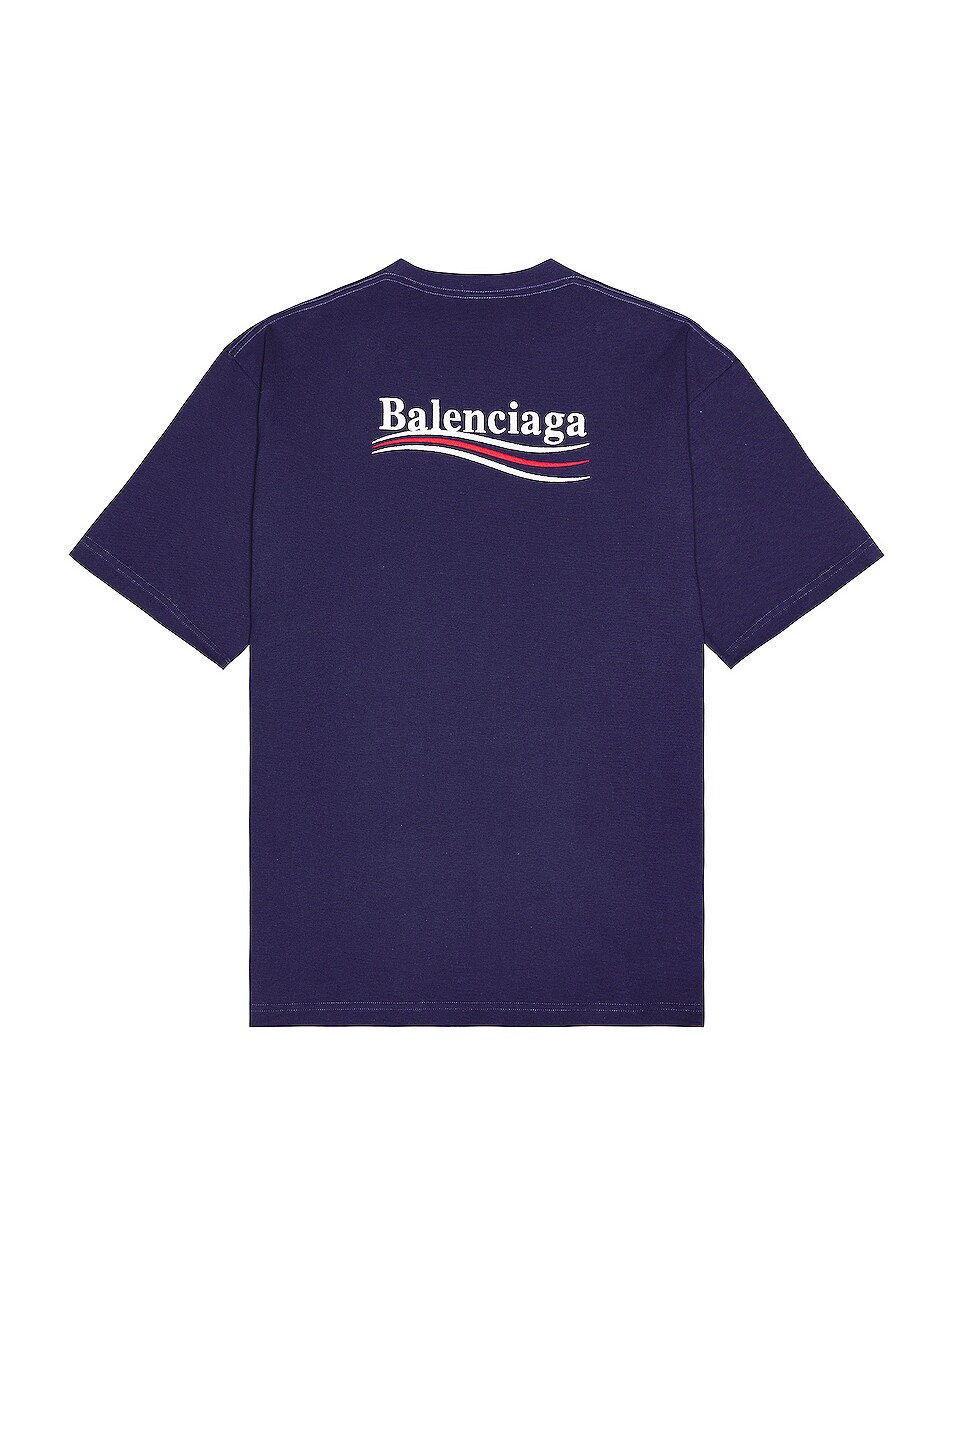 Image 1 of Balenciaga Large Fit T-Shirt in Pacific Blue & White